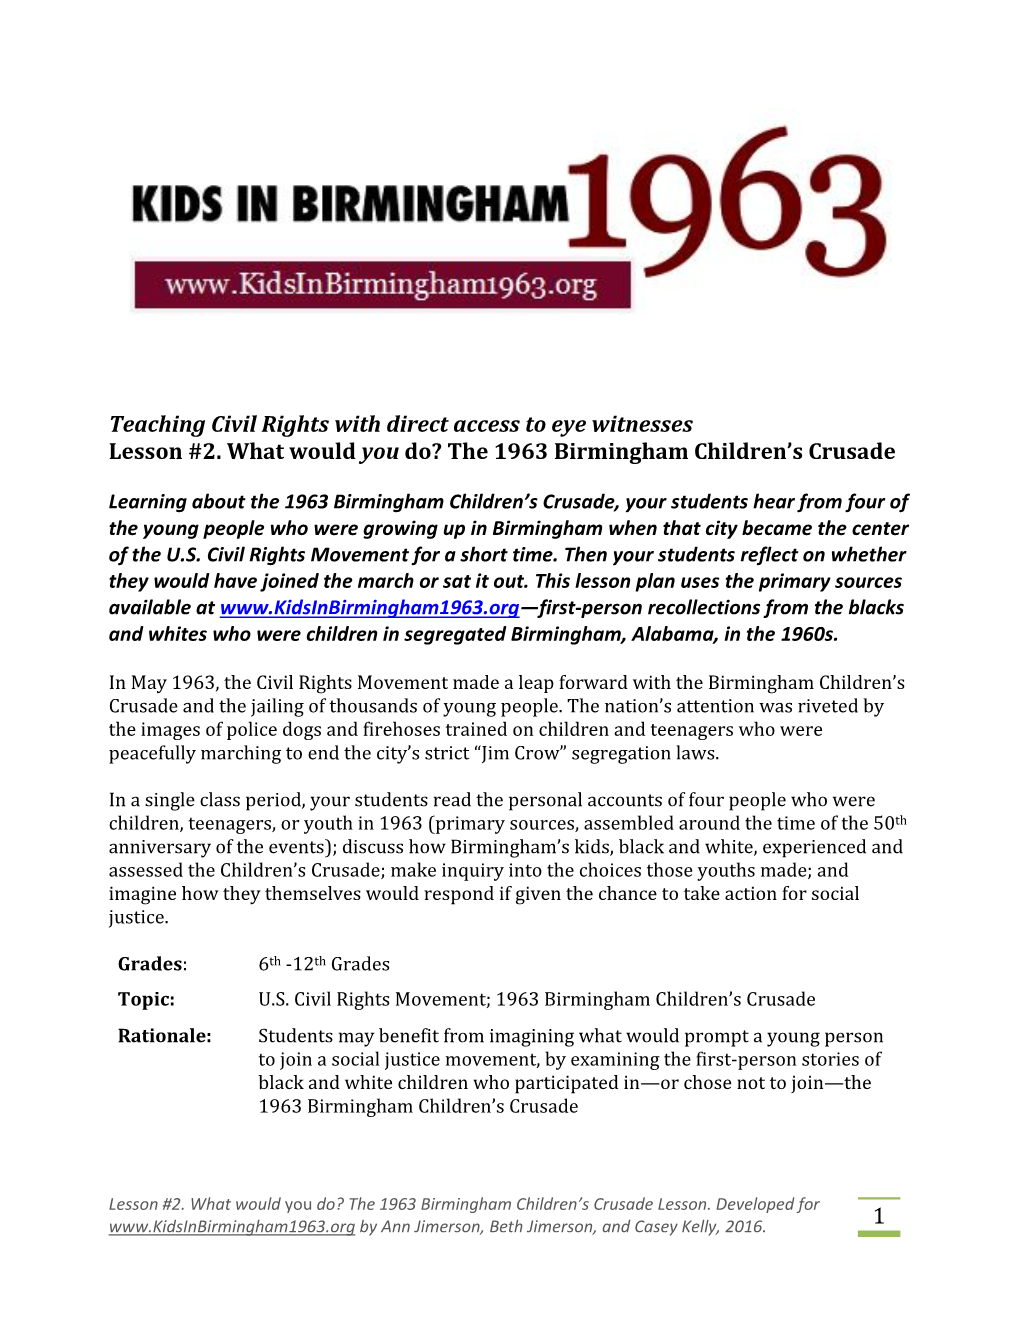 Lesson 2. What Would YOU Do? the 1963 Birmingham Children's Crusade